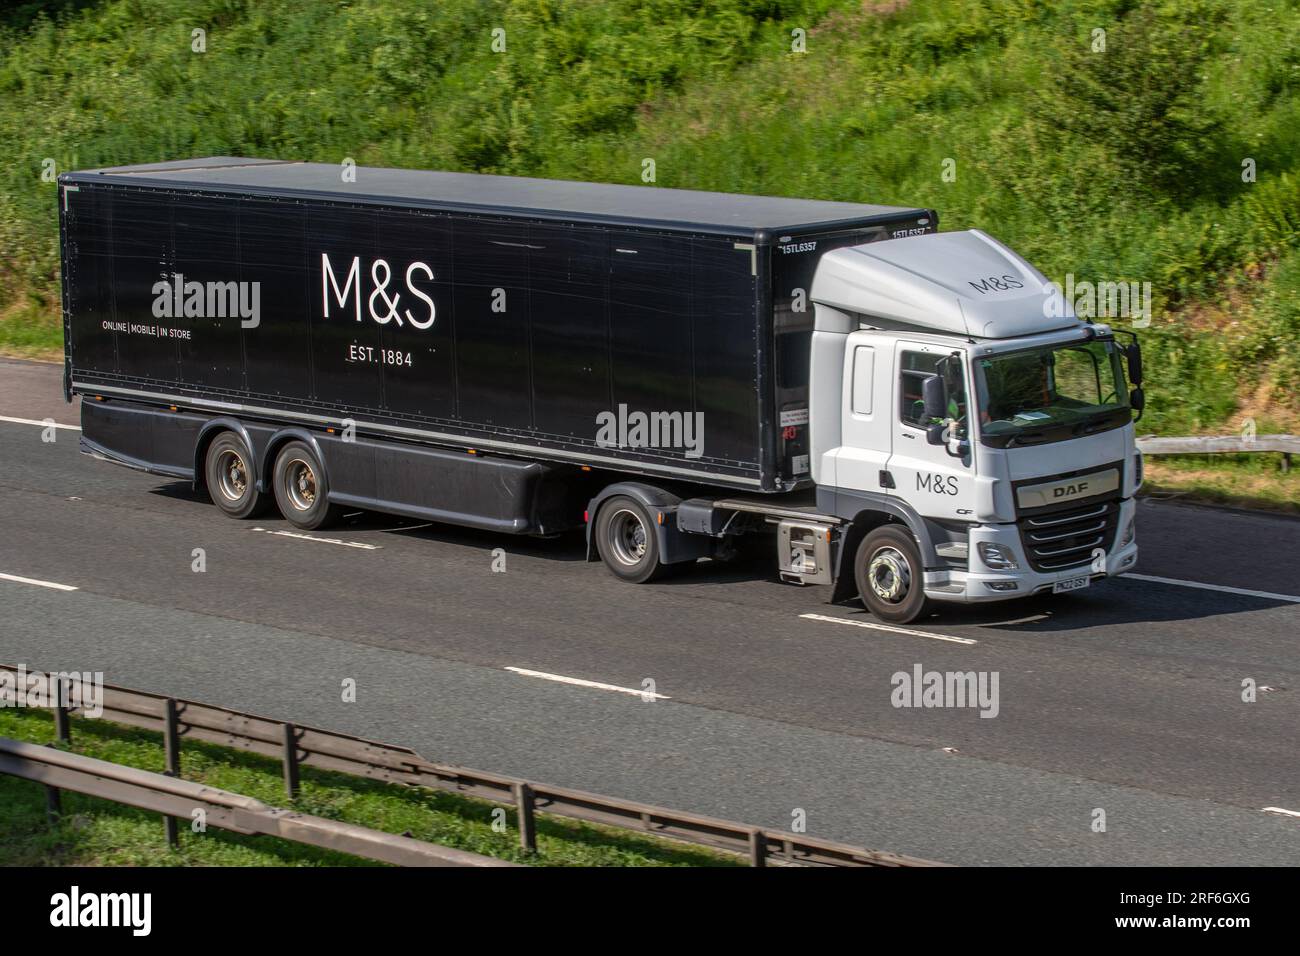 M&S, 'M&S'  Marks and Spencer, MS Supermarket DAF CF, delivery vehicle, 12902cc; travelling on the M6 Motorway, Manchester, UK Stock Photo